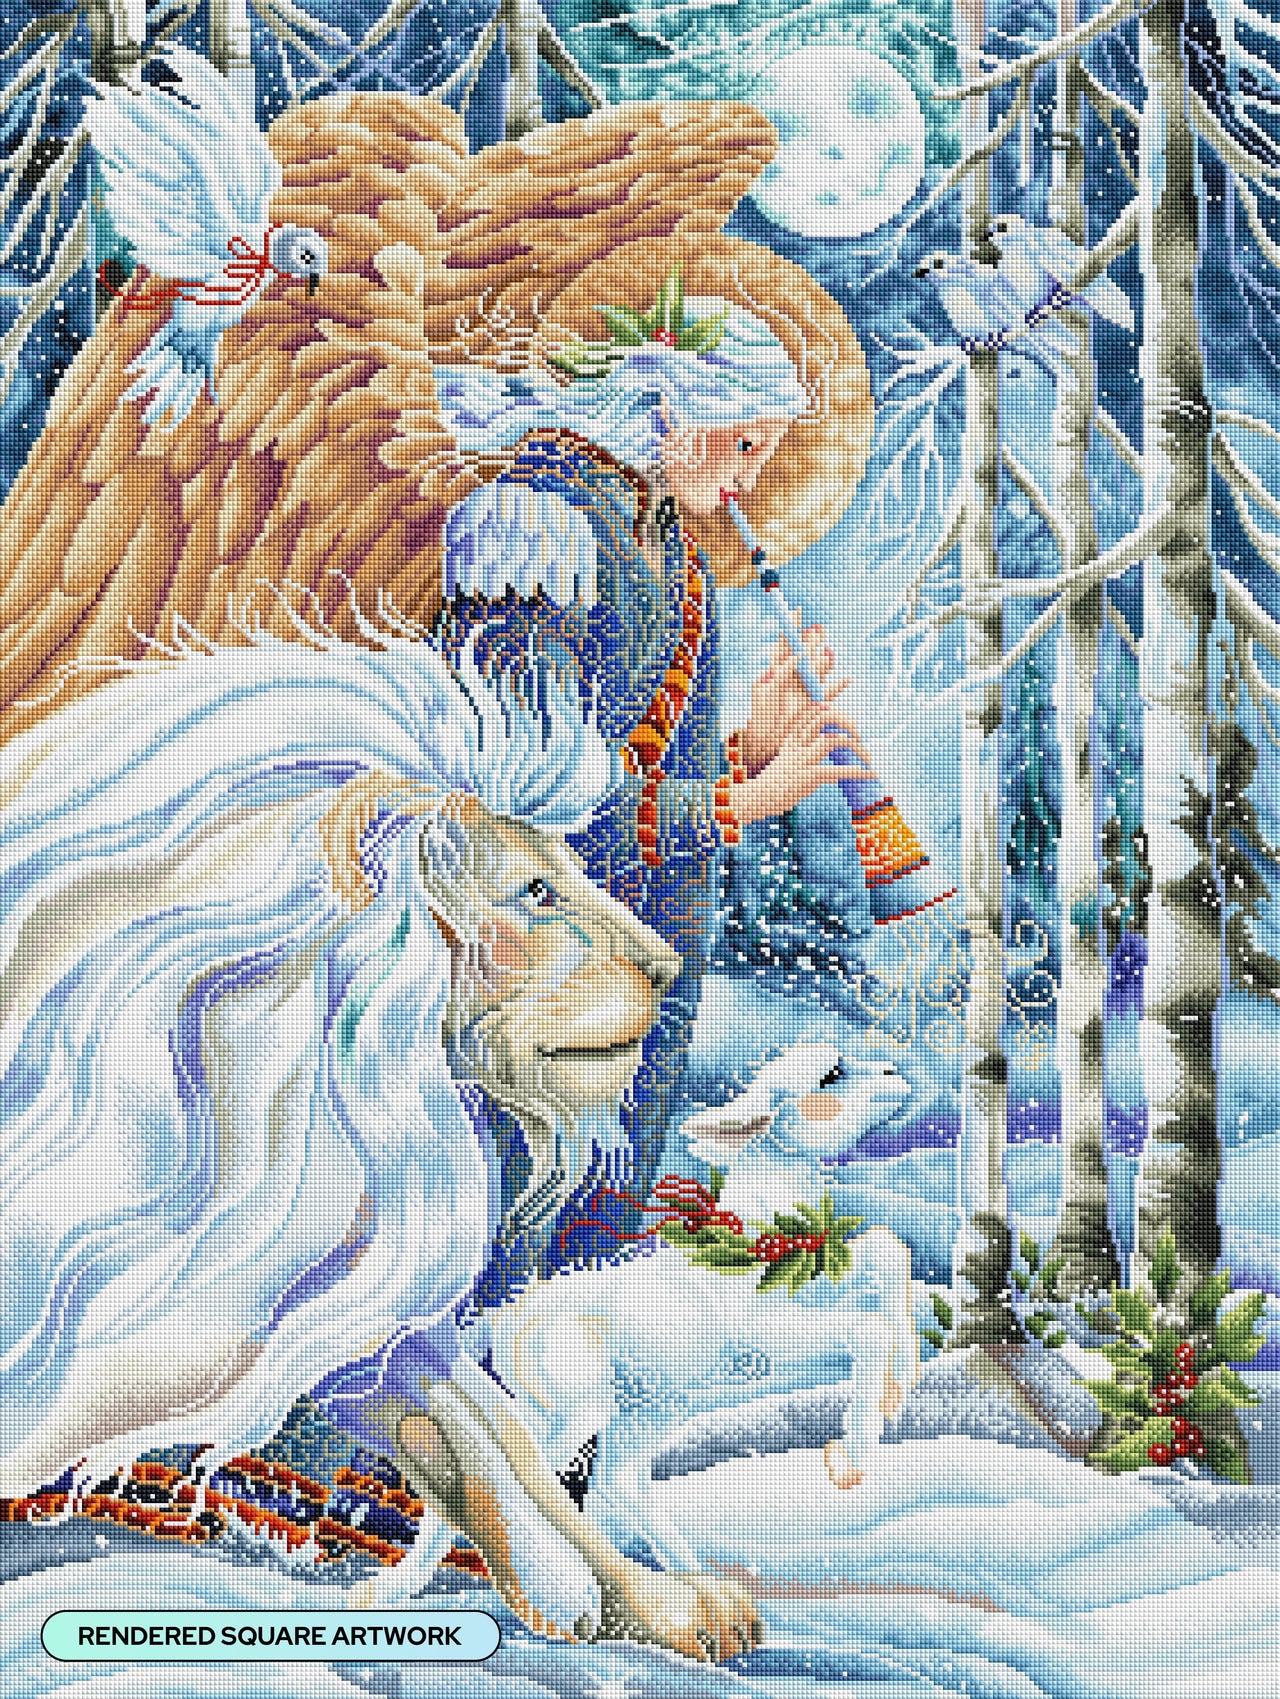 Diamond Painting Herald of Peace 27.6" x 36.6" (70cm x 93cm) / Square With 65 Colors Including 4 ABs and 2 Fairy Dust Diamonds / 104,813